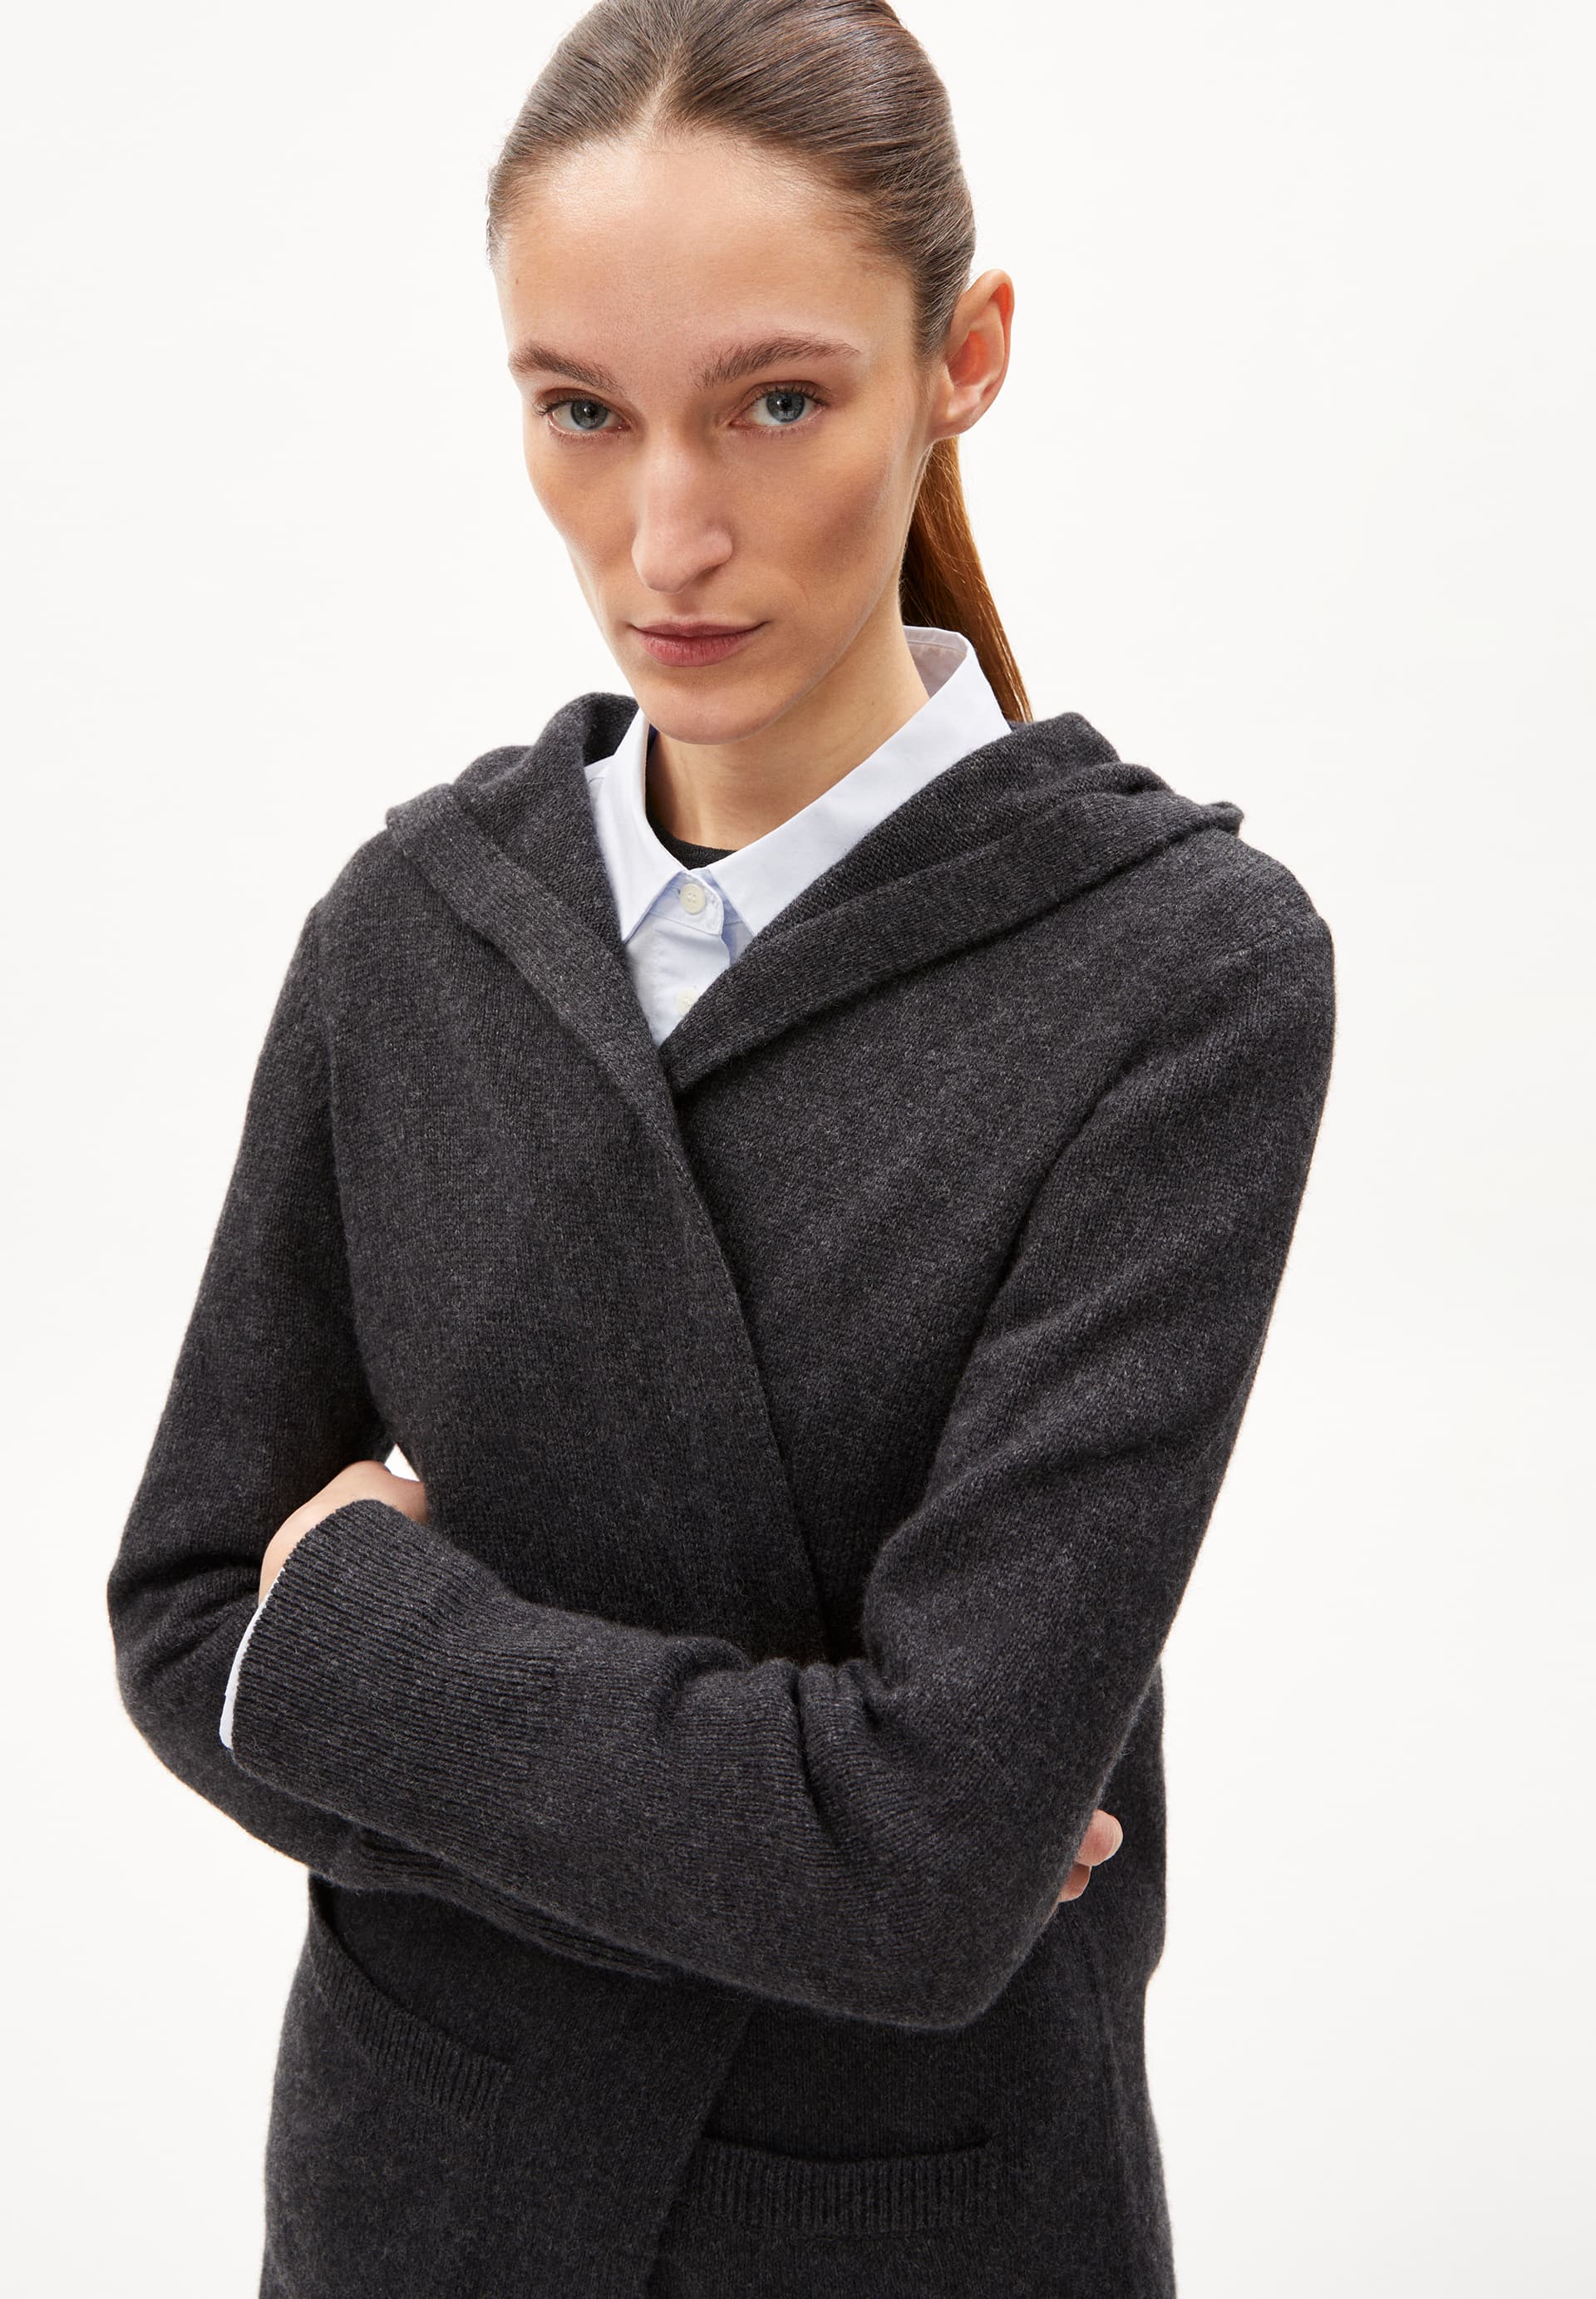 WARMAA Cardigan Relaxed Fit made of Organic Wool Mix